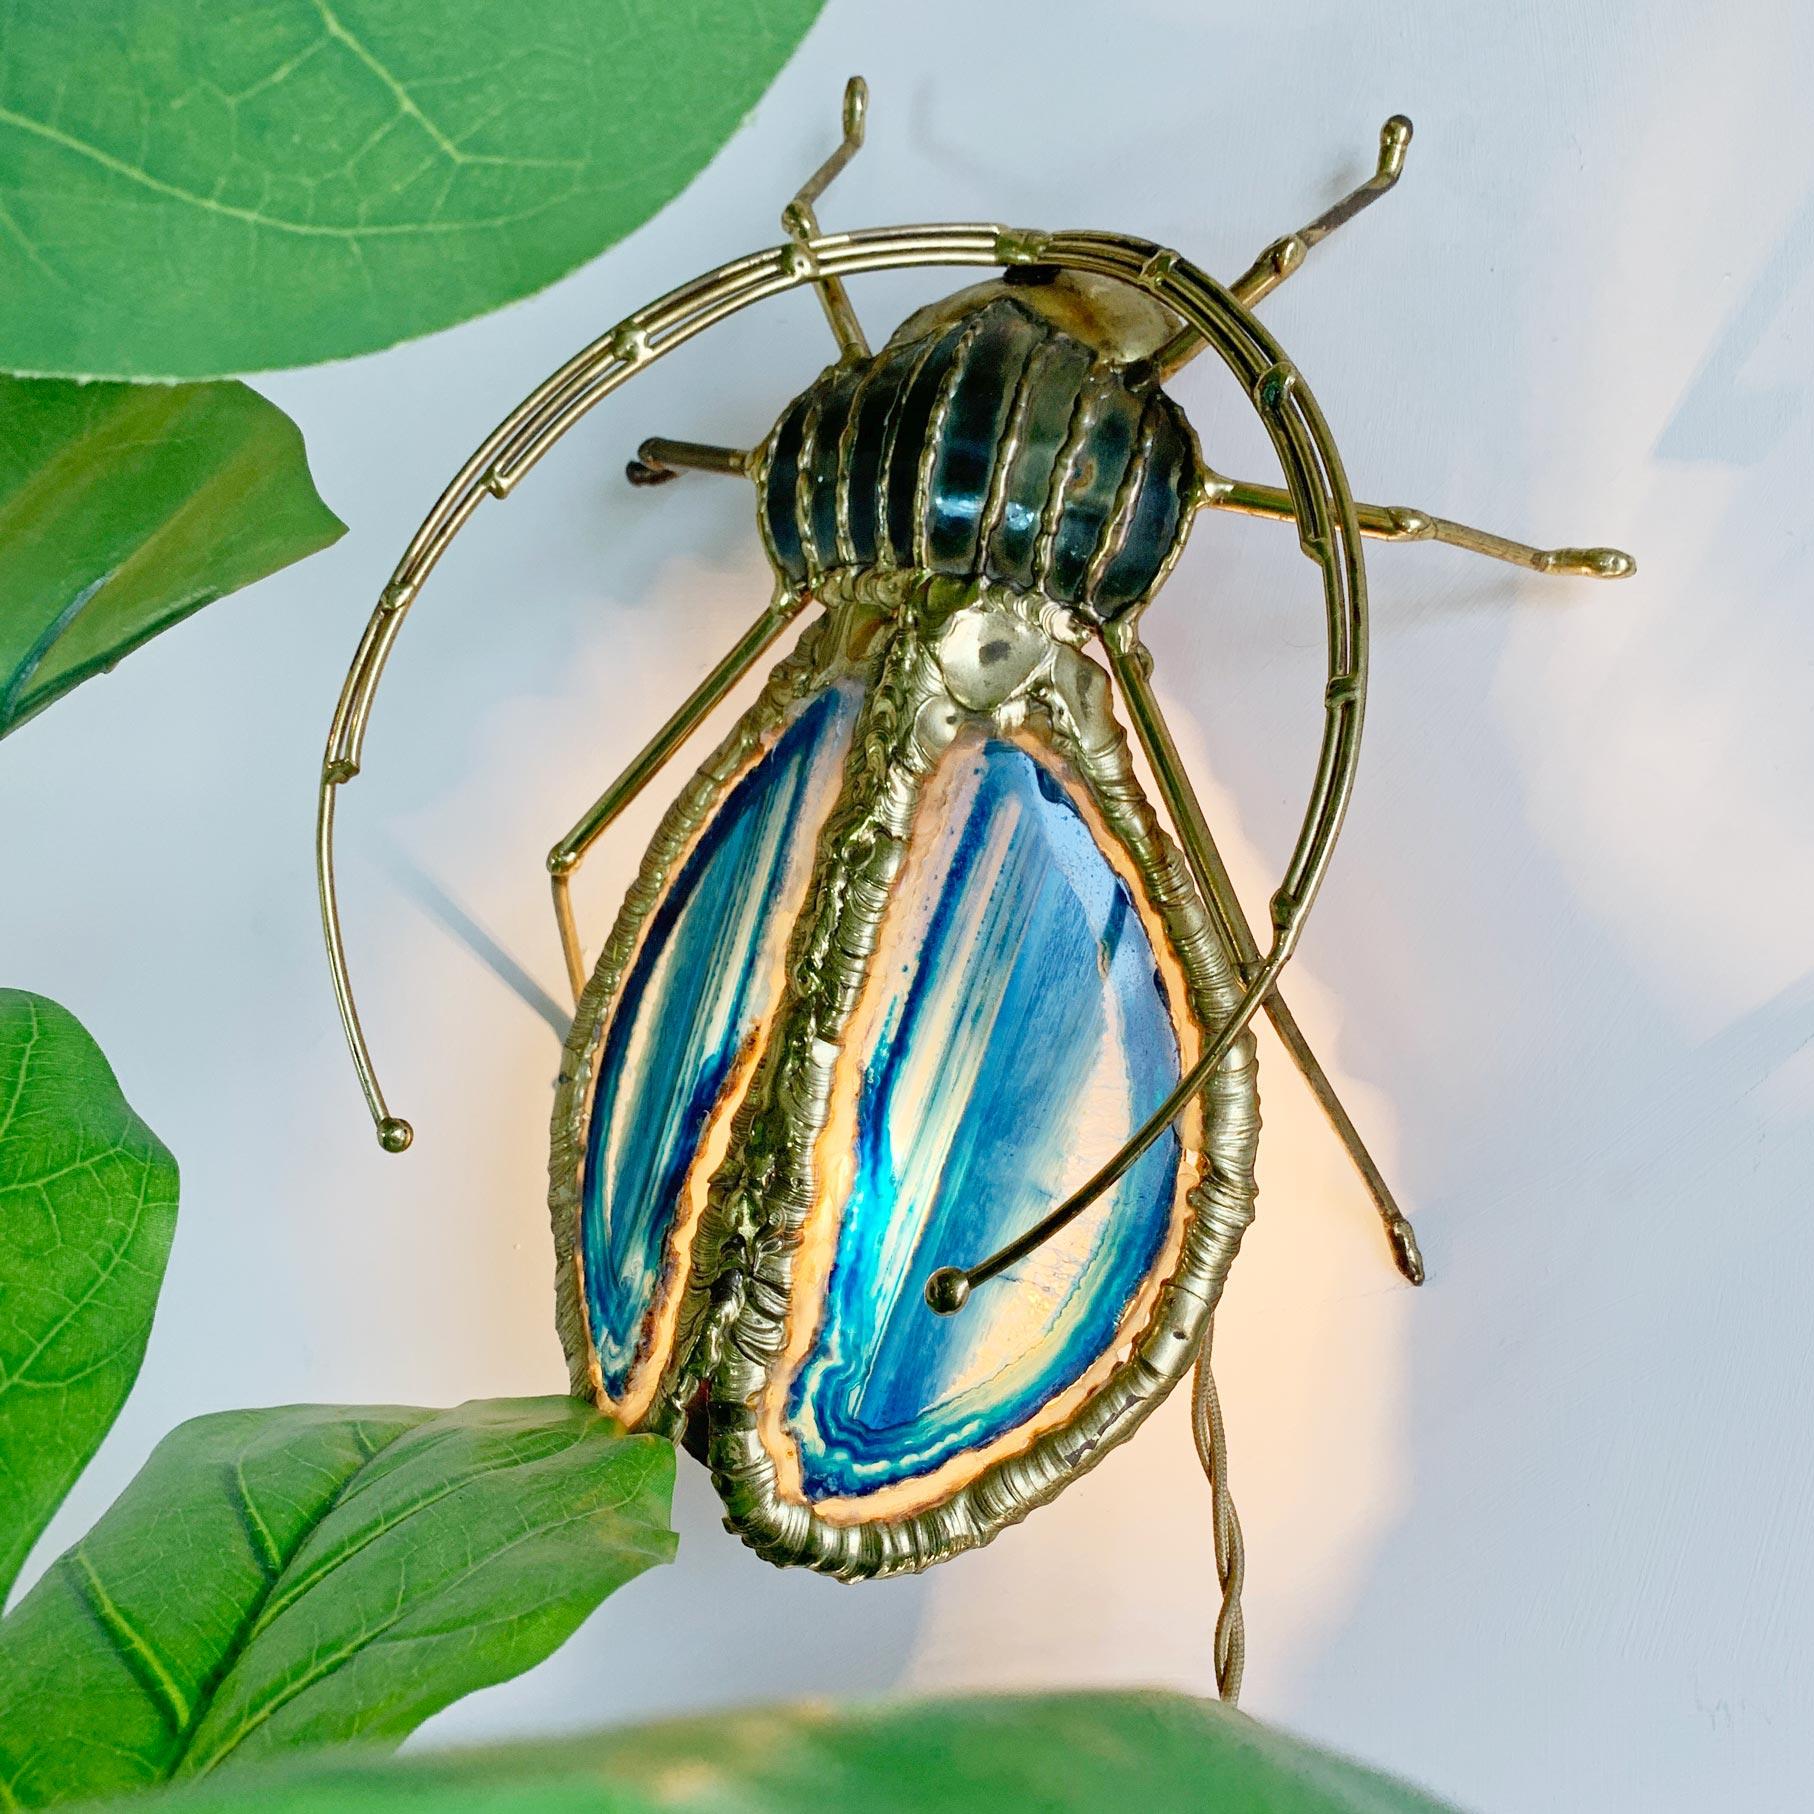 Extremely rare sculpture in brass and agate, by Henri Fernandez for atelier Duval Brasseur, modelled as a Longhorn Beetle and dating to the 1970’s.

The beautiful blue agate wings are set within the large brass body, and illuminated from below by